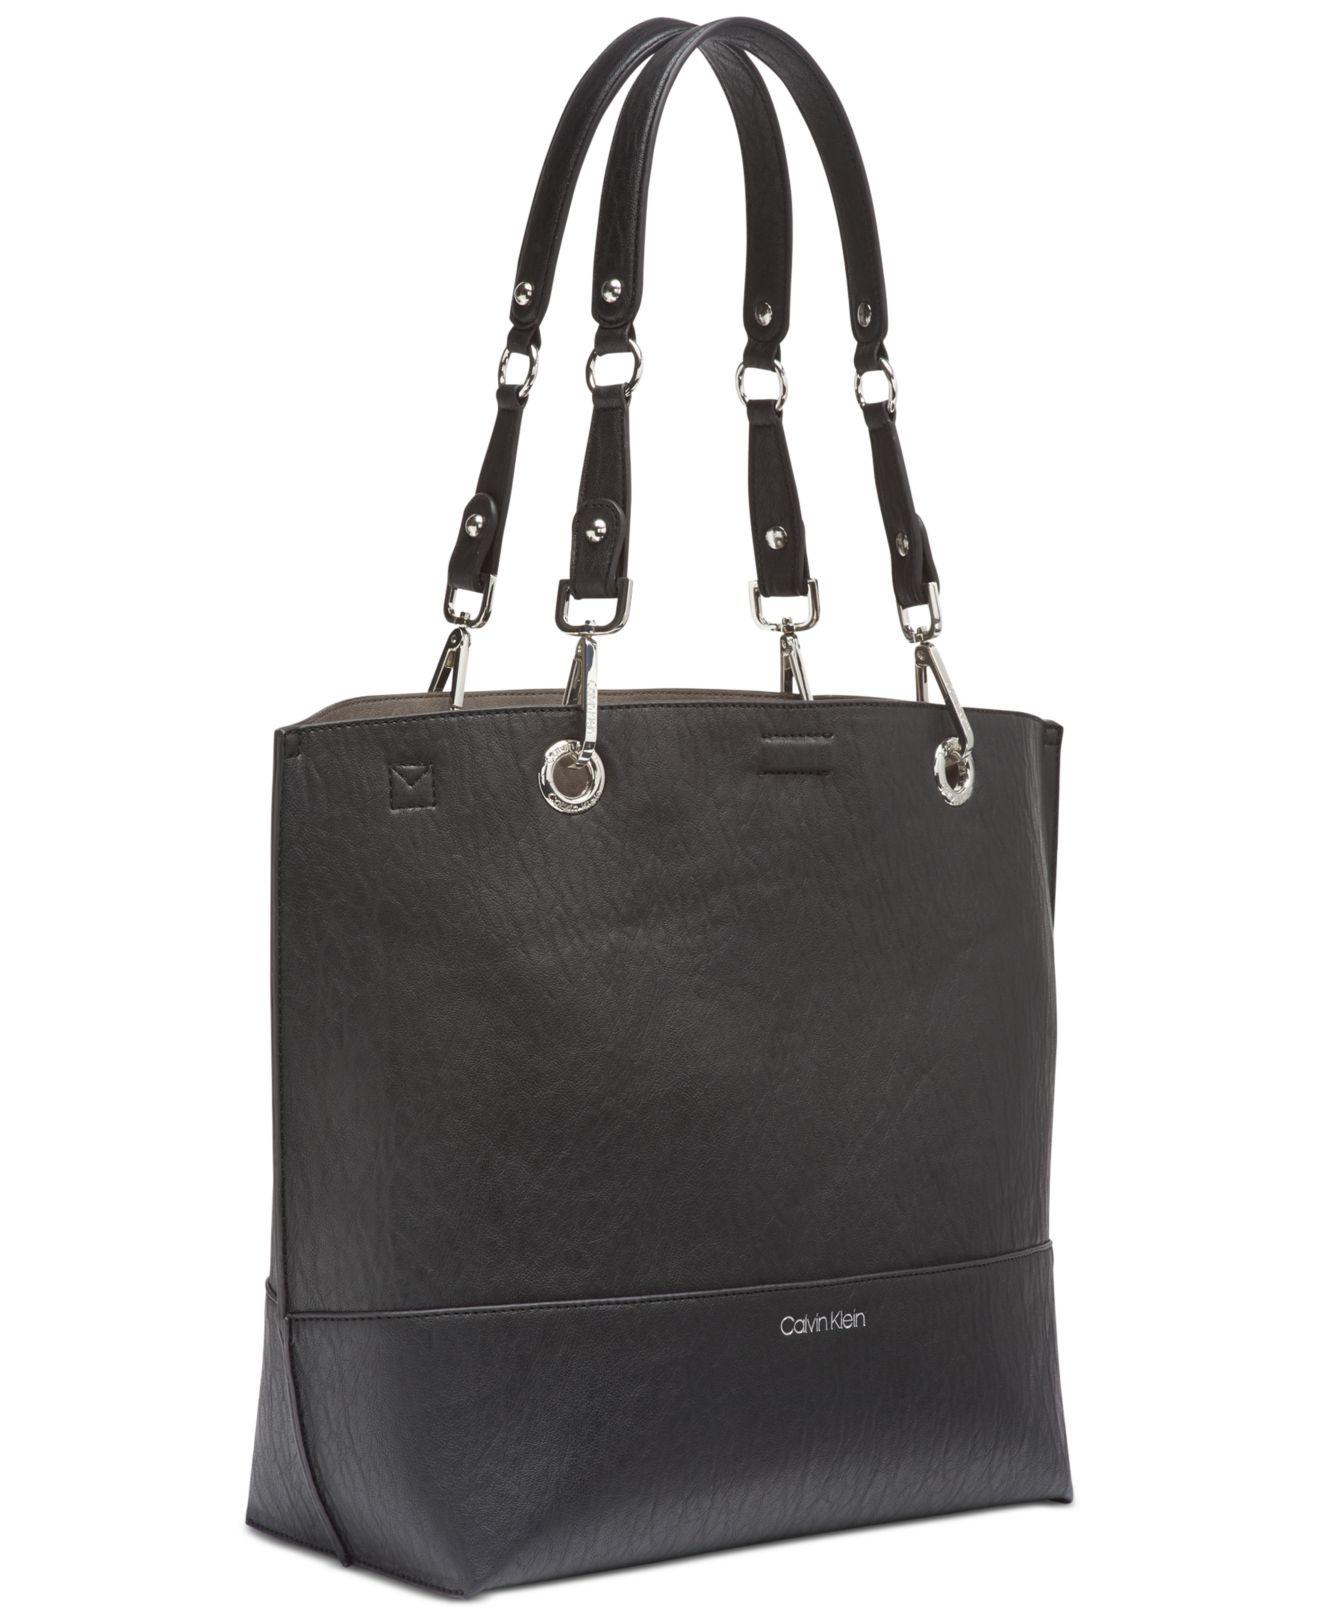 Calvin Klein Sonoma Tote With Pouch in Black Lyst